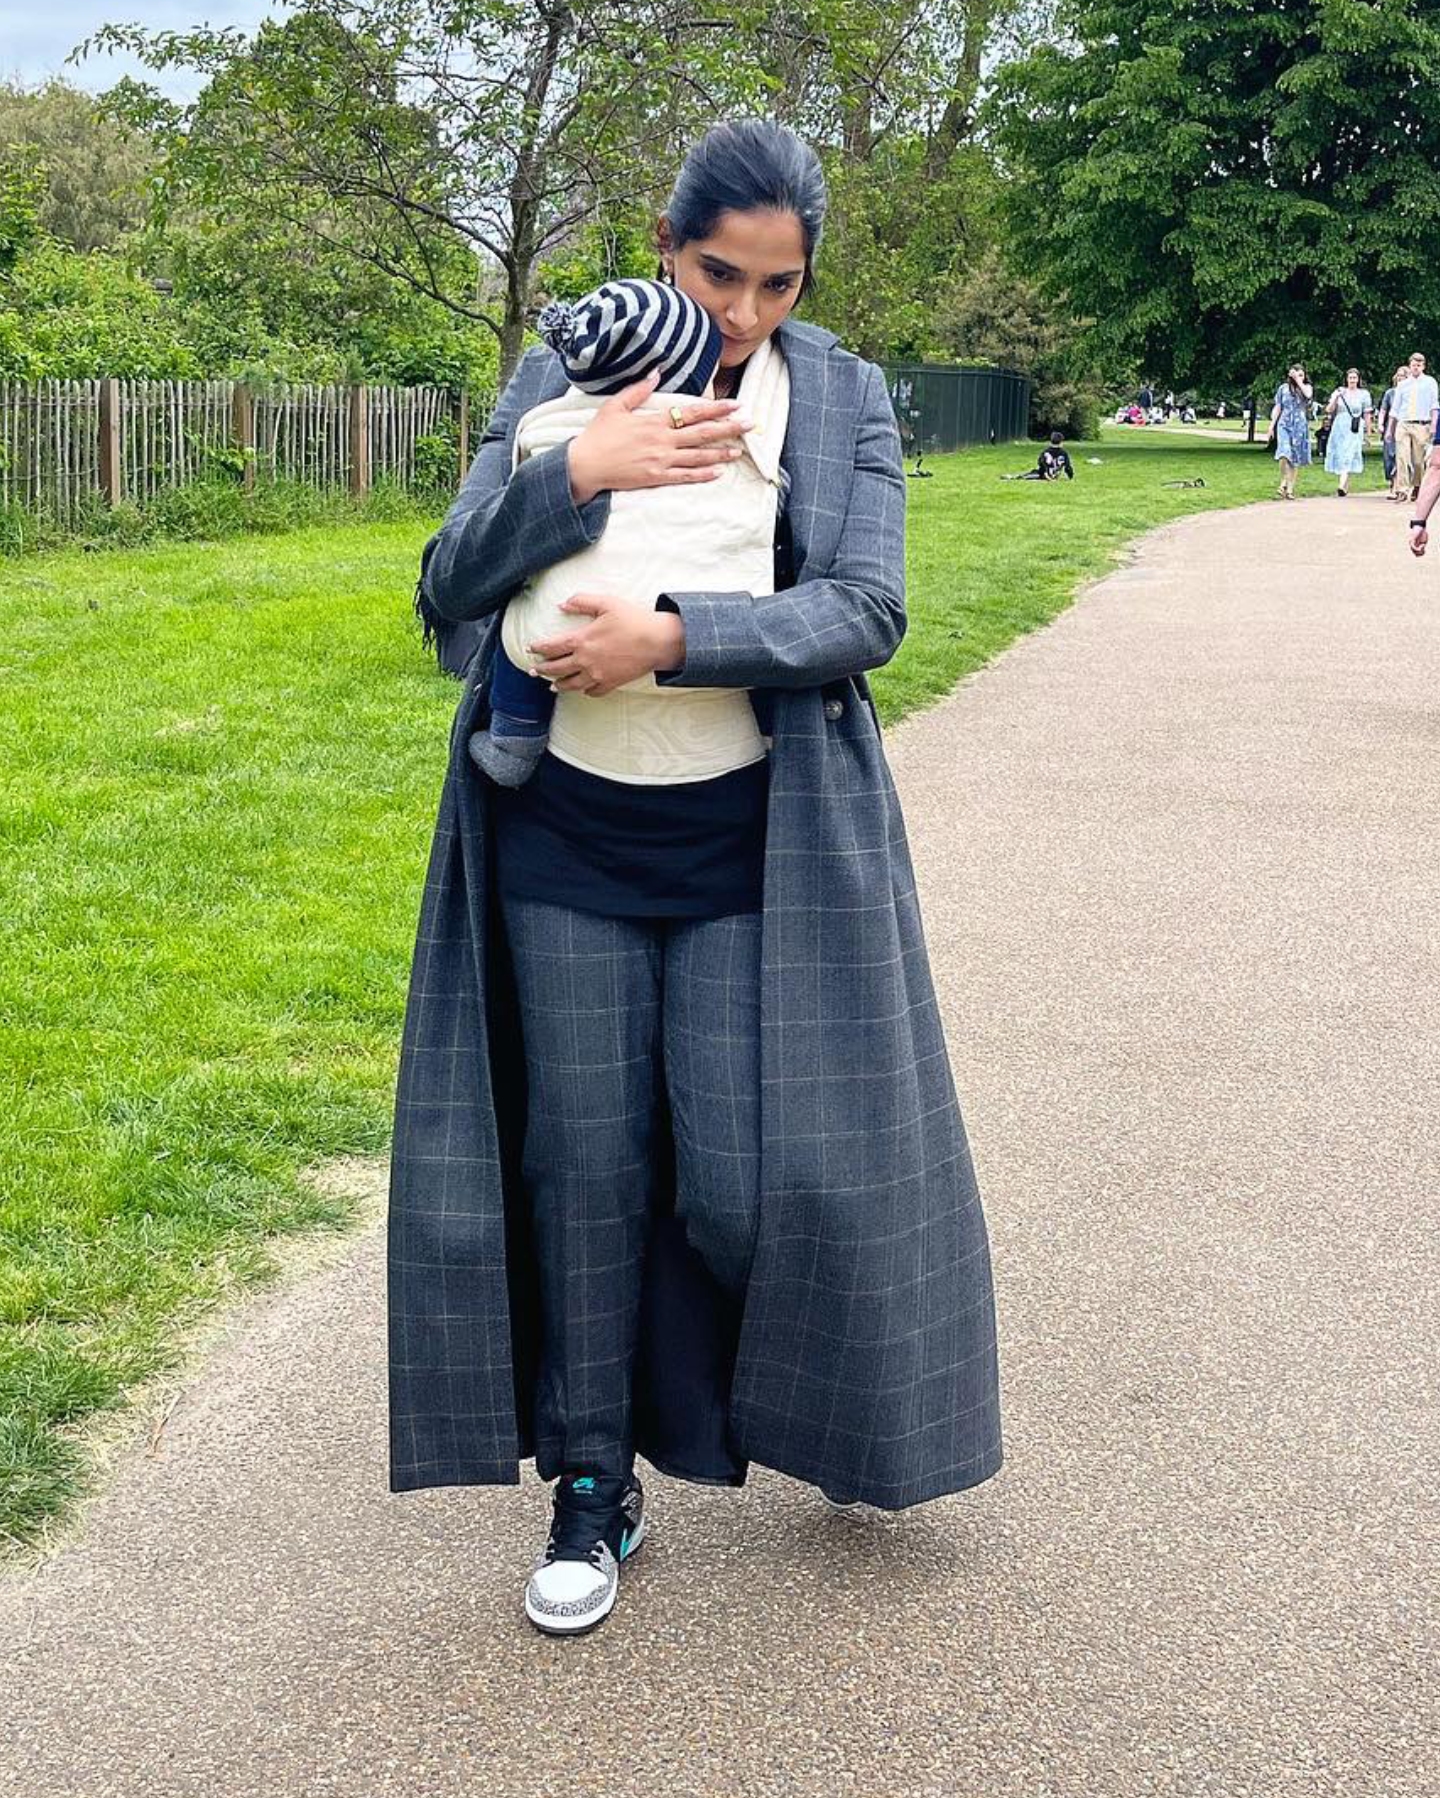 Sonam Kapoor goes on a stroll with son Vayu